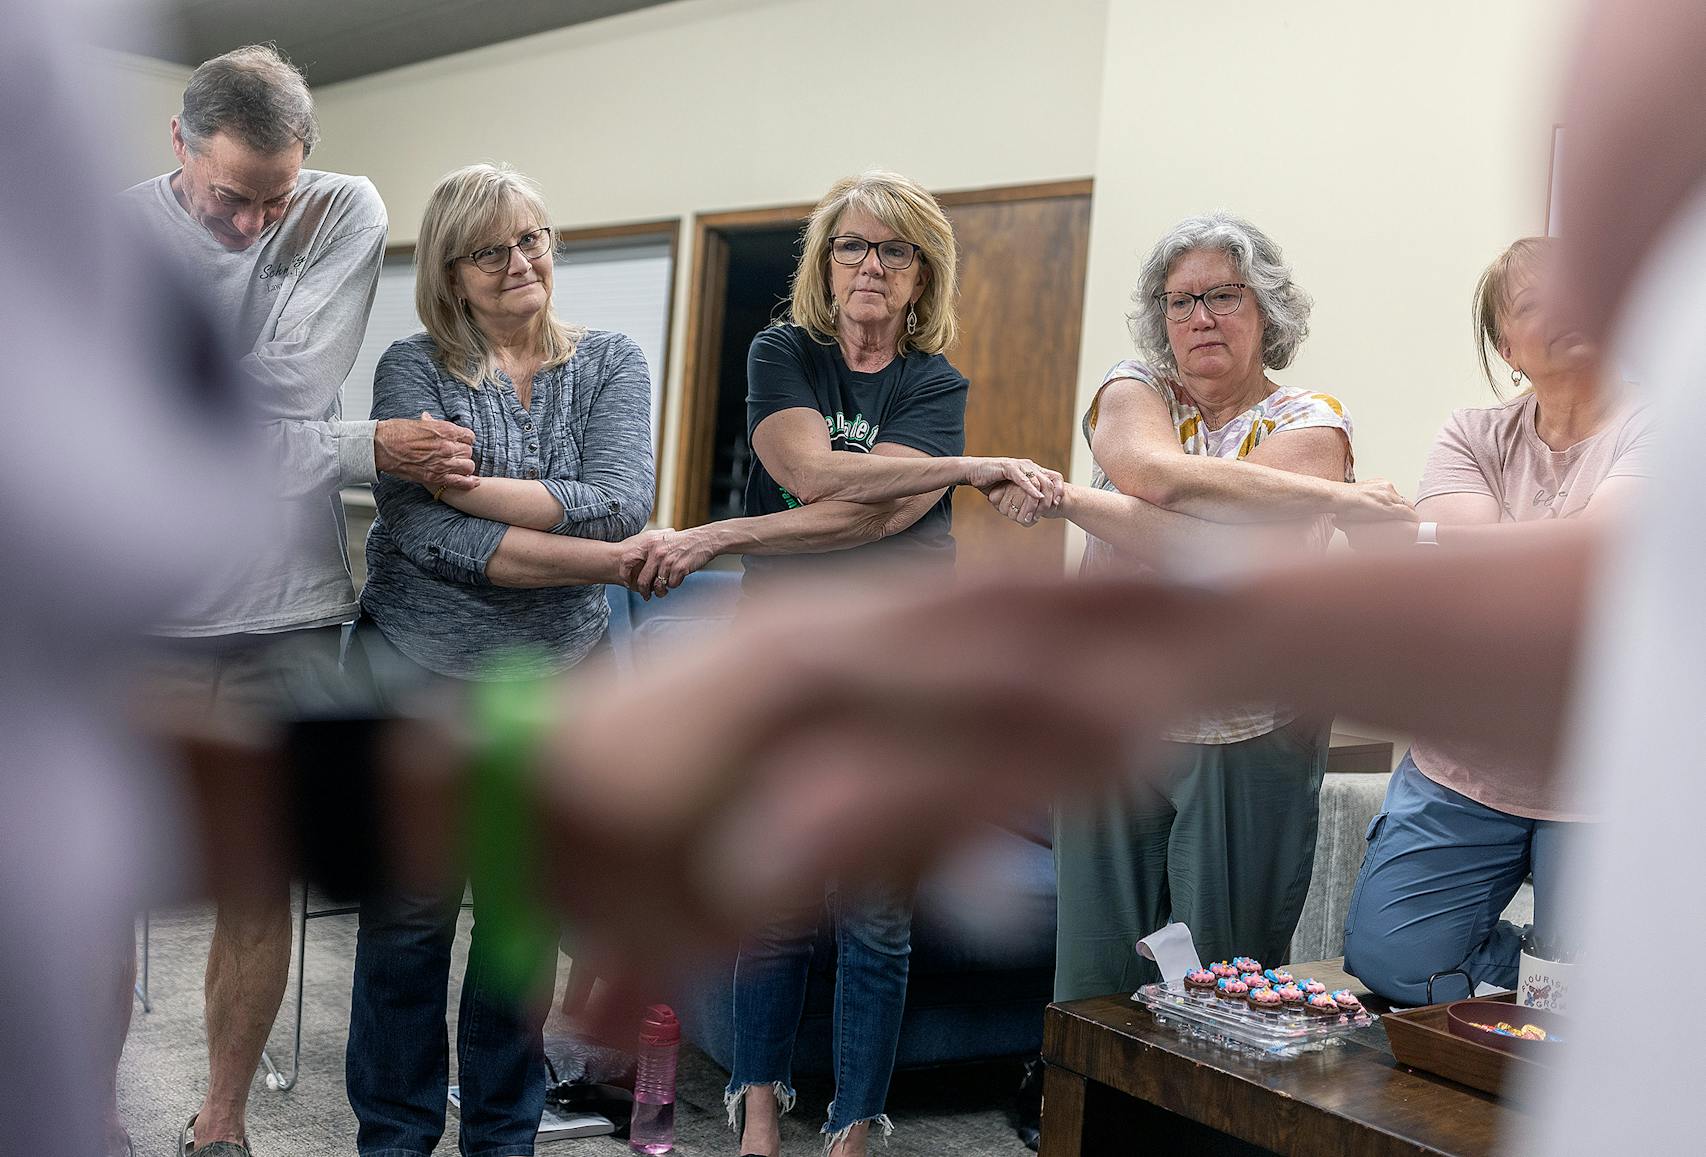 Pam Lanhart joined hands with others as they called out their loved ones' names. “We are all not in the same boat, but we are in the same ocean,” said Lanhart.